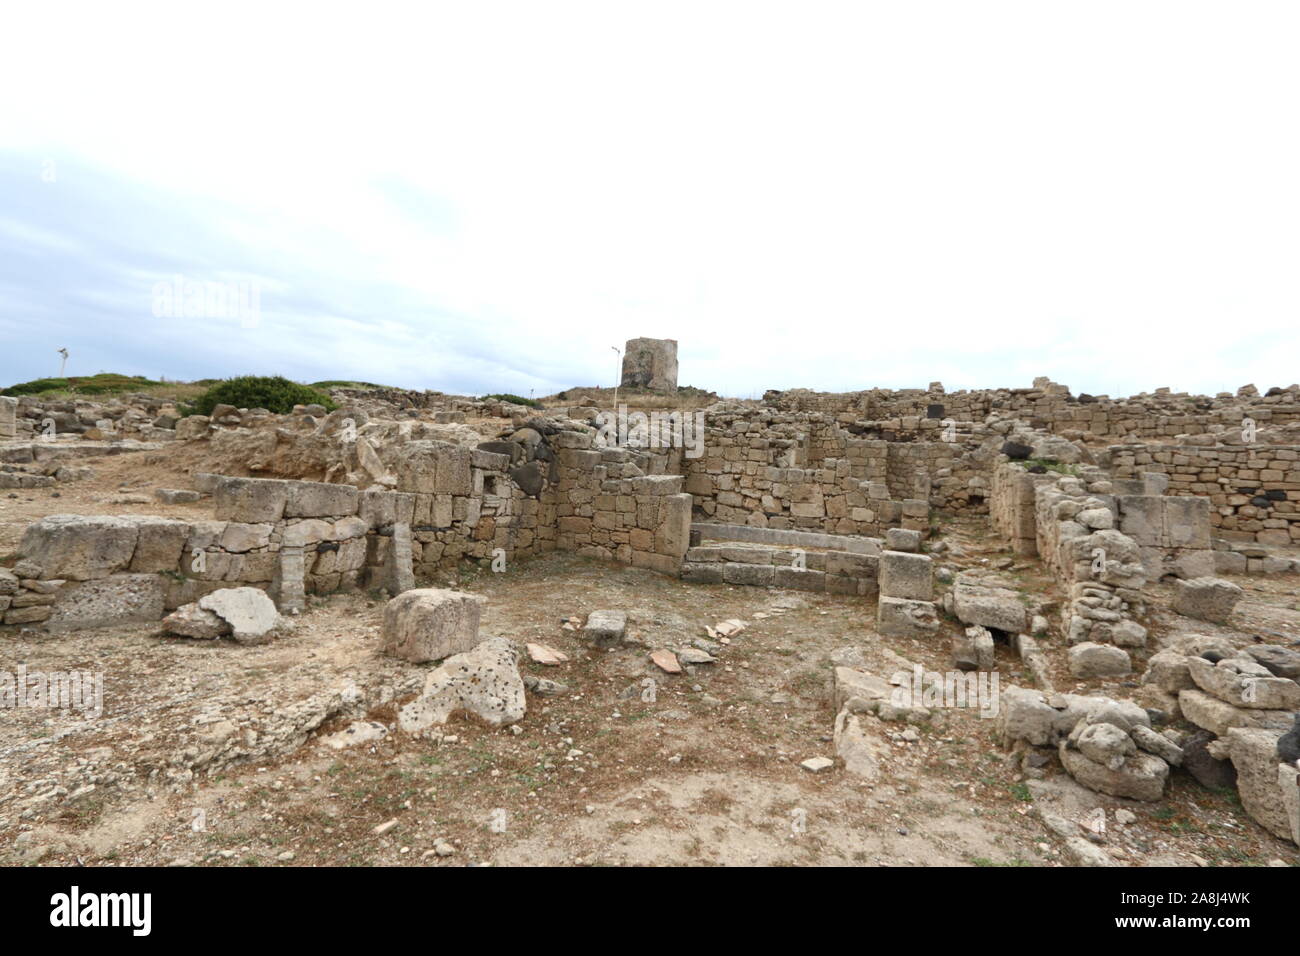 Cabras, Italy - 4 July 2011: the archaeological site of Tharros in the province of Oristano Stock Photo